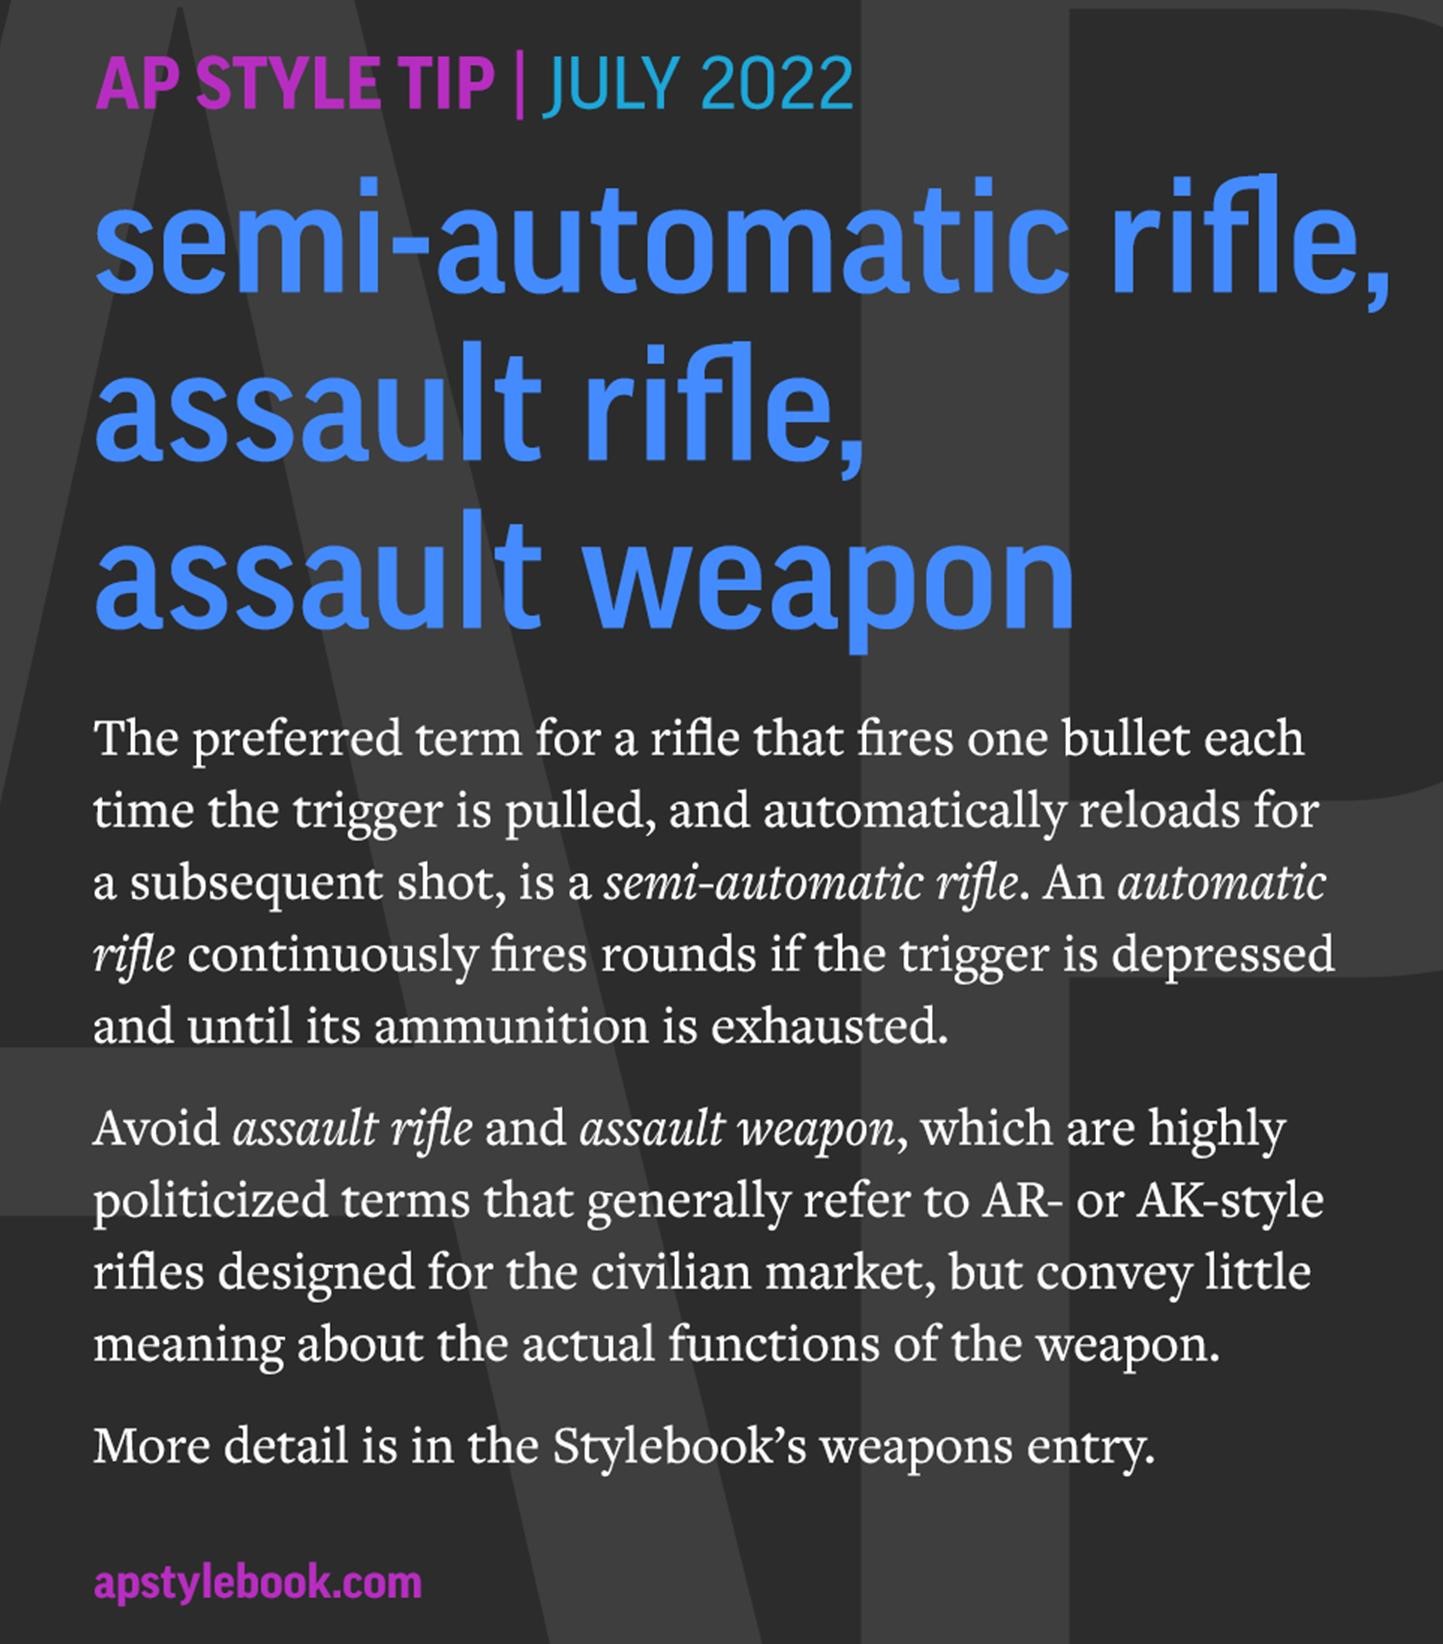 Image of the AP Stylebook entry defining assault weapon